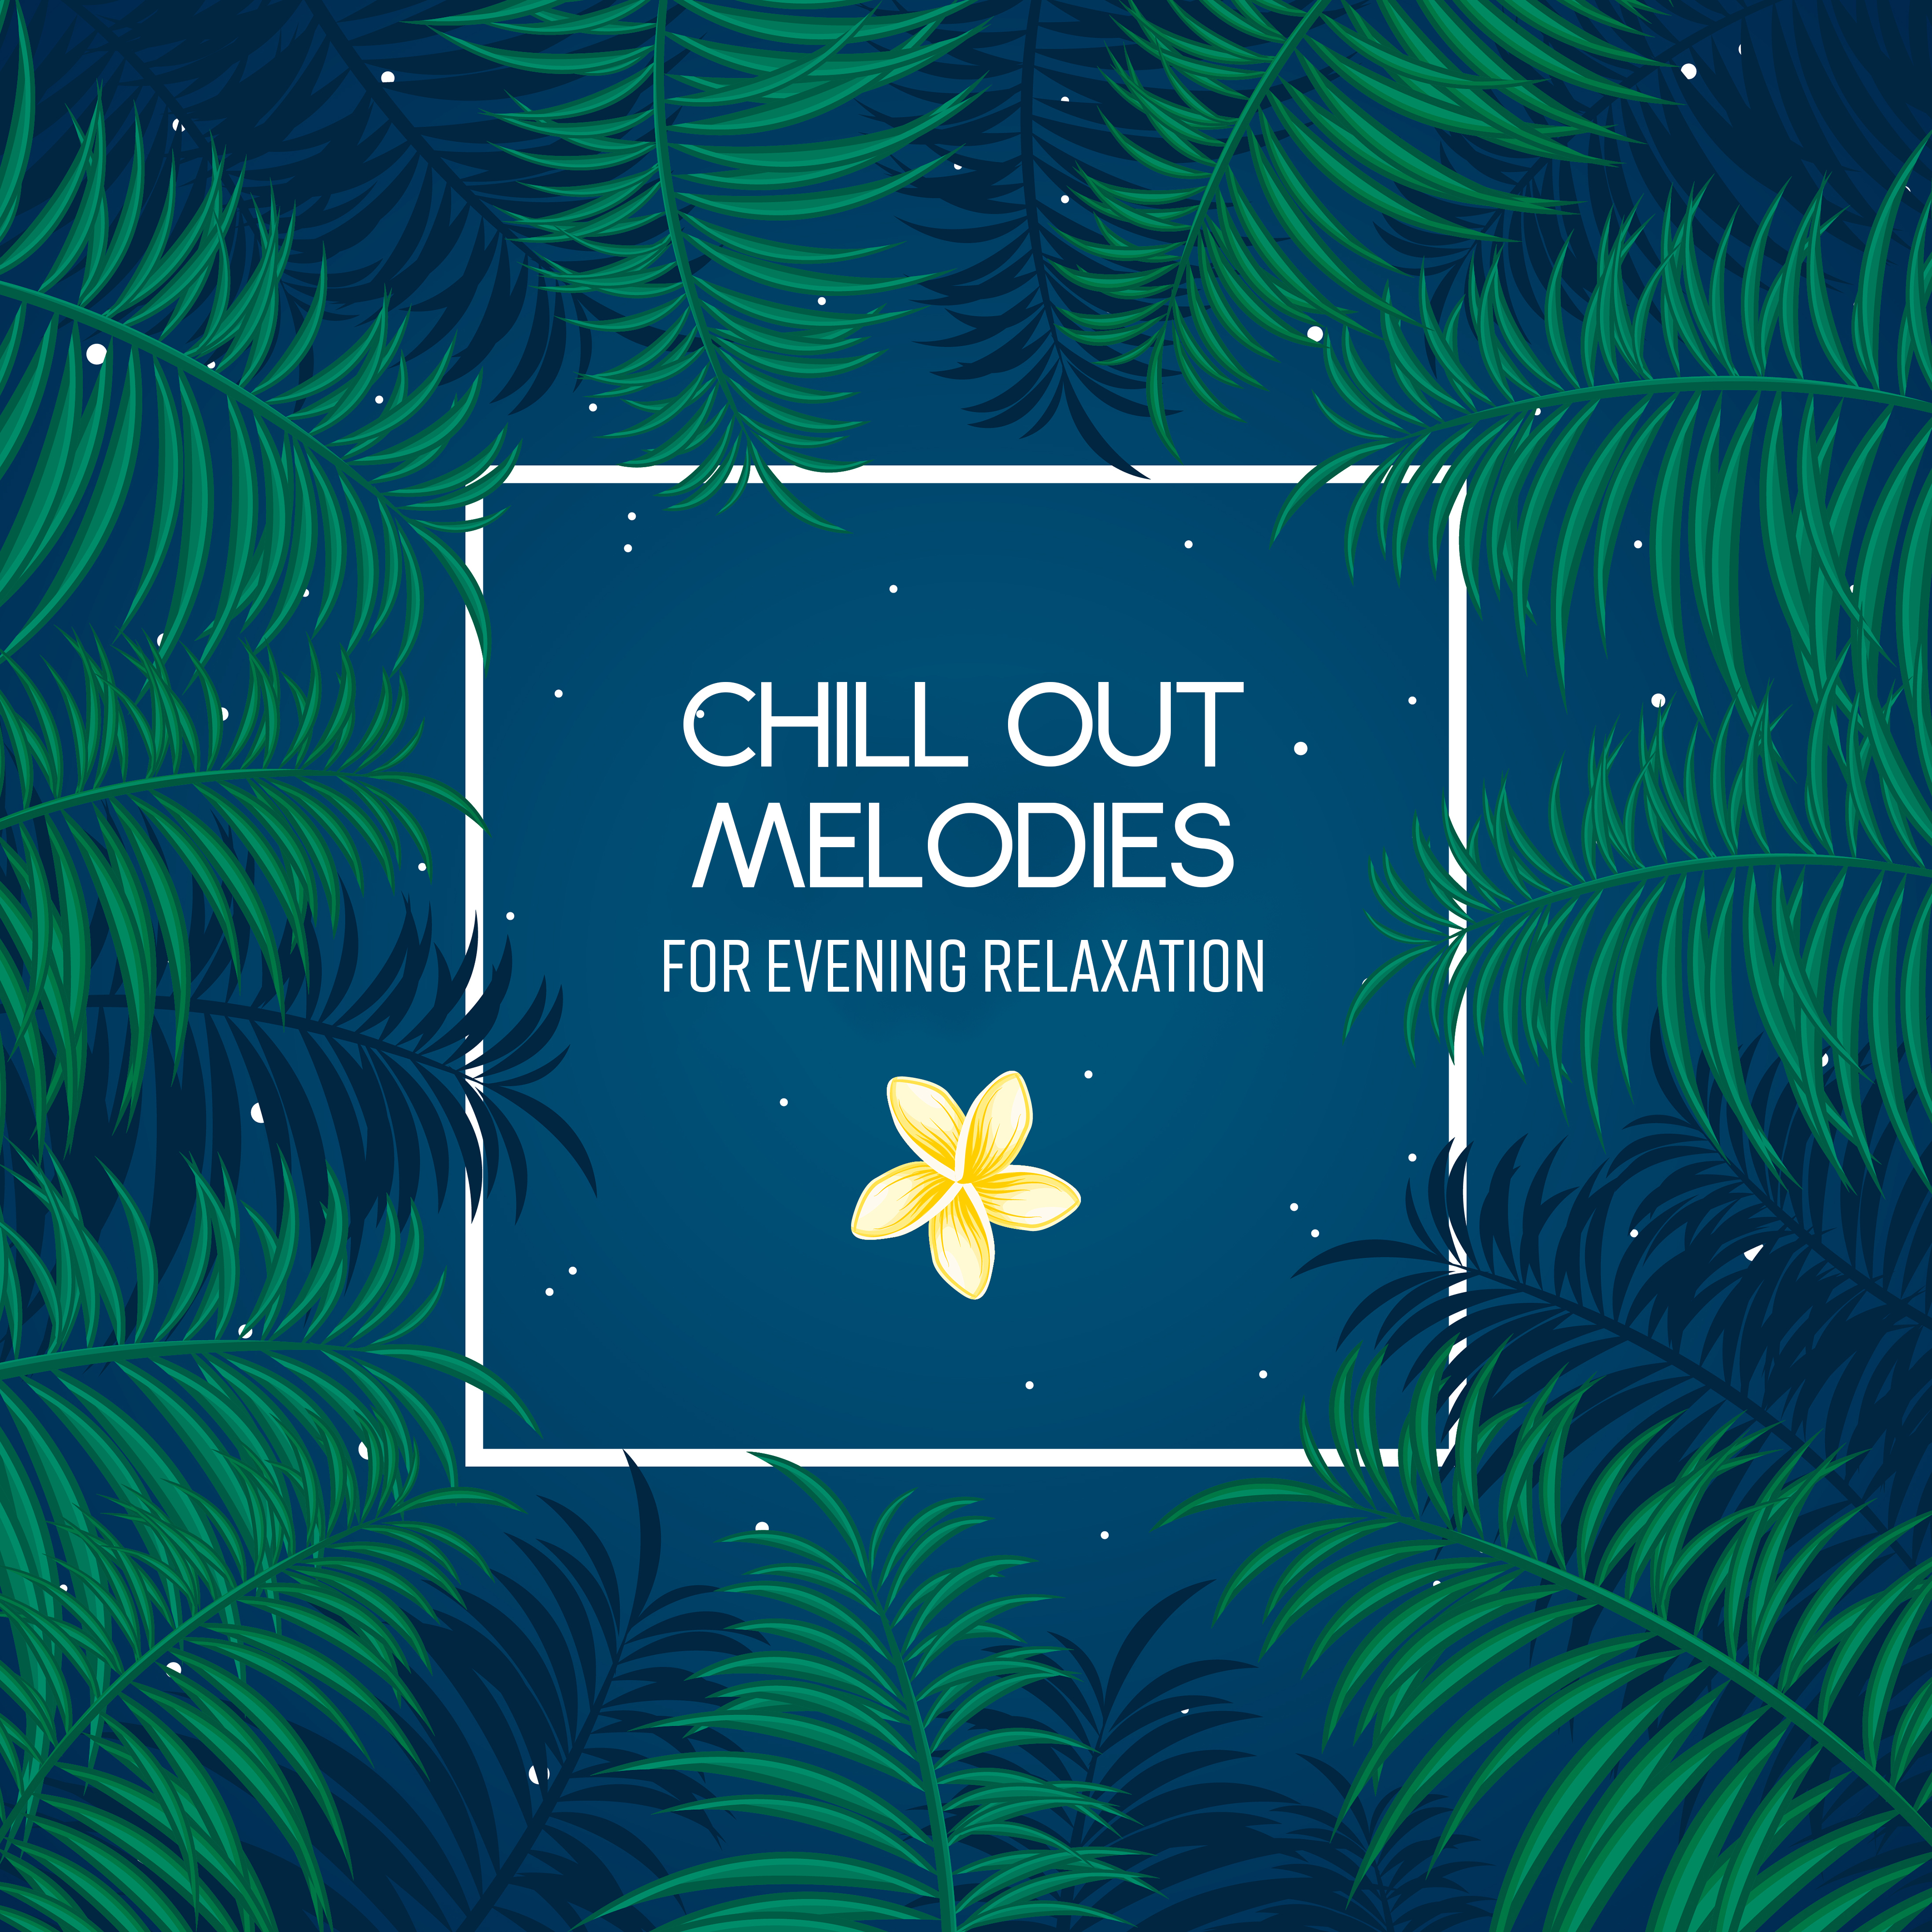 Chill Out Melodies for Evening Relaxation